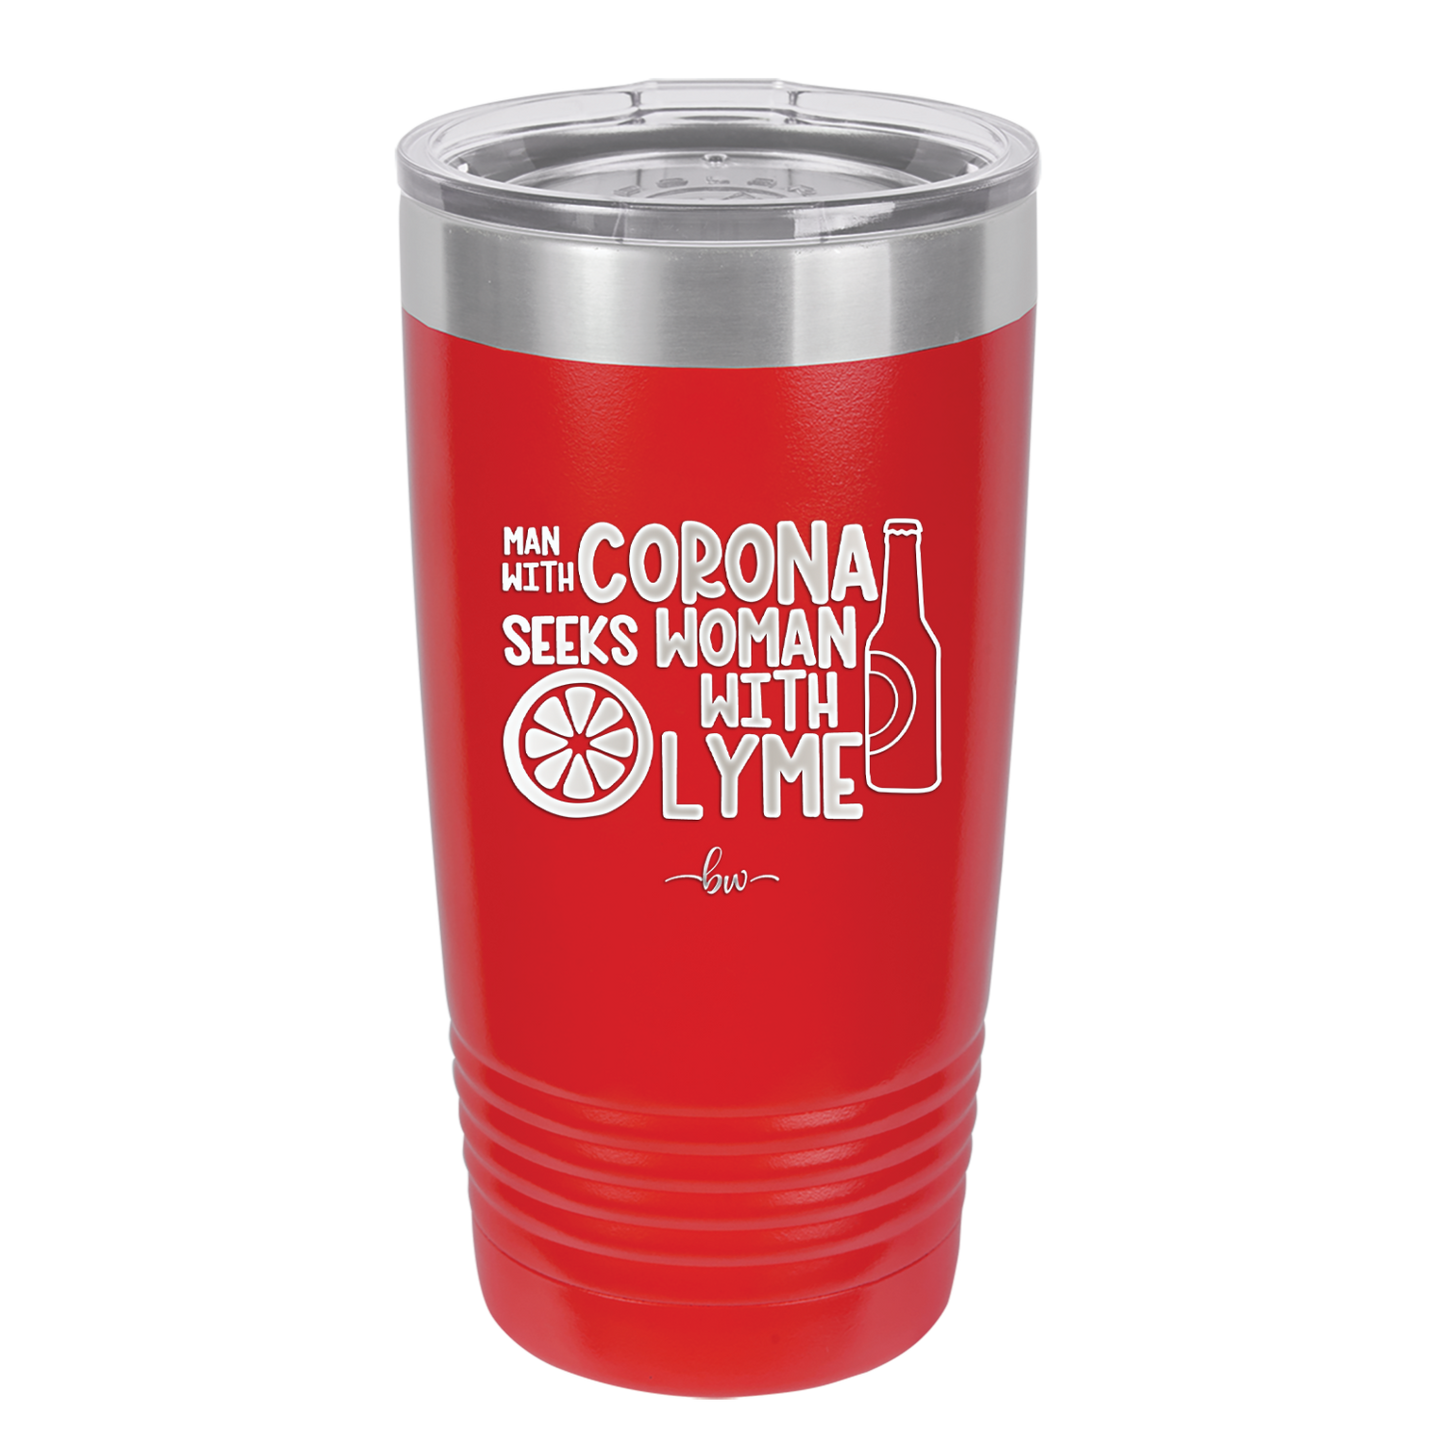 Man With Corona Seeks Woman with Lyme - Laser Engraved Stainless Steel Drinkware - 2272 -